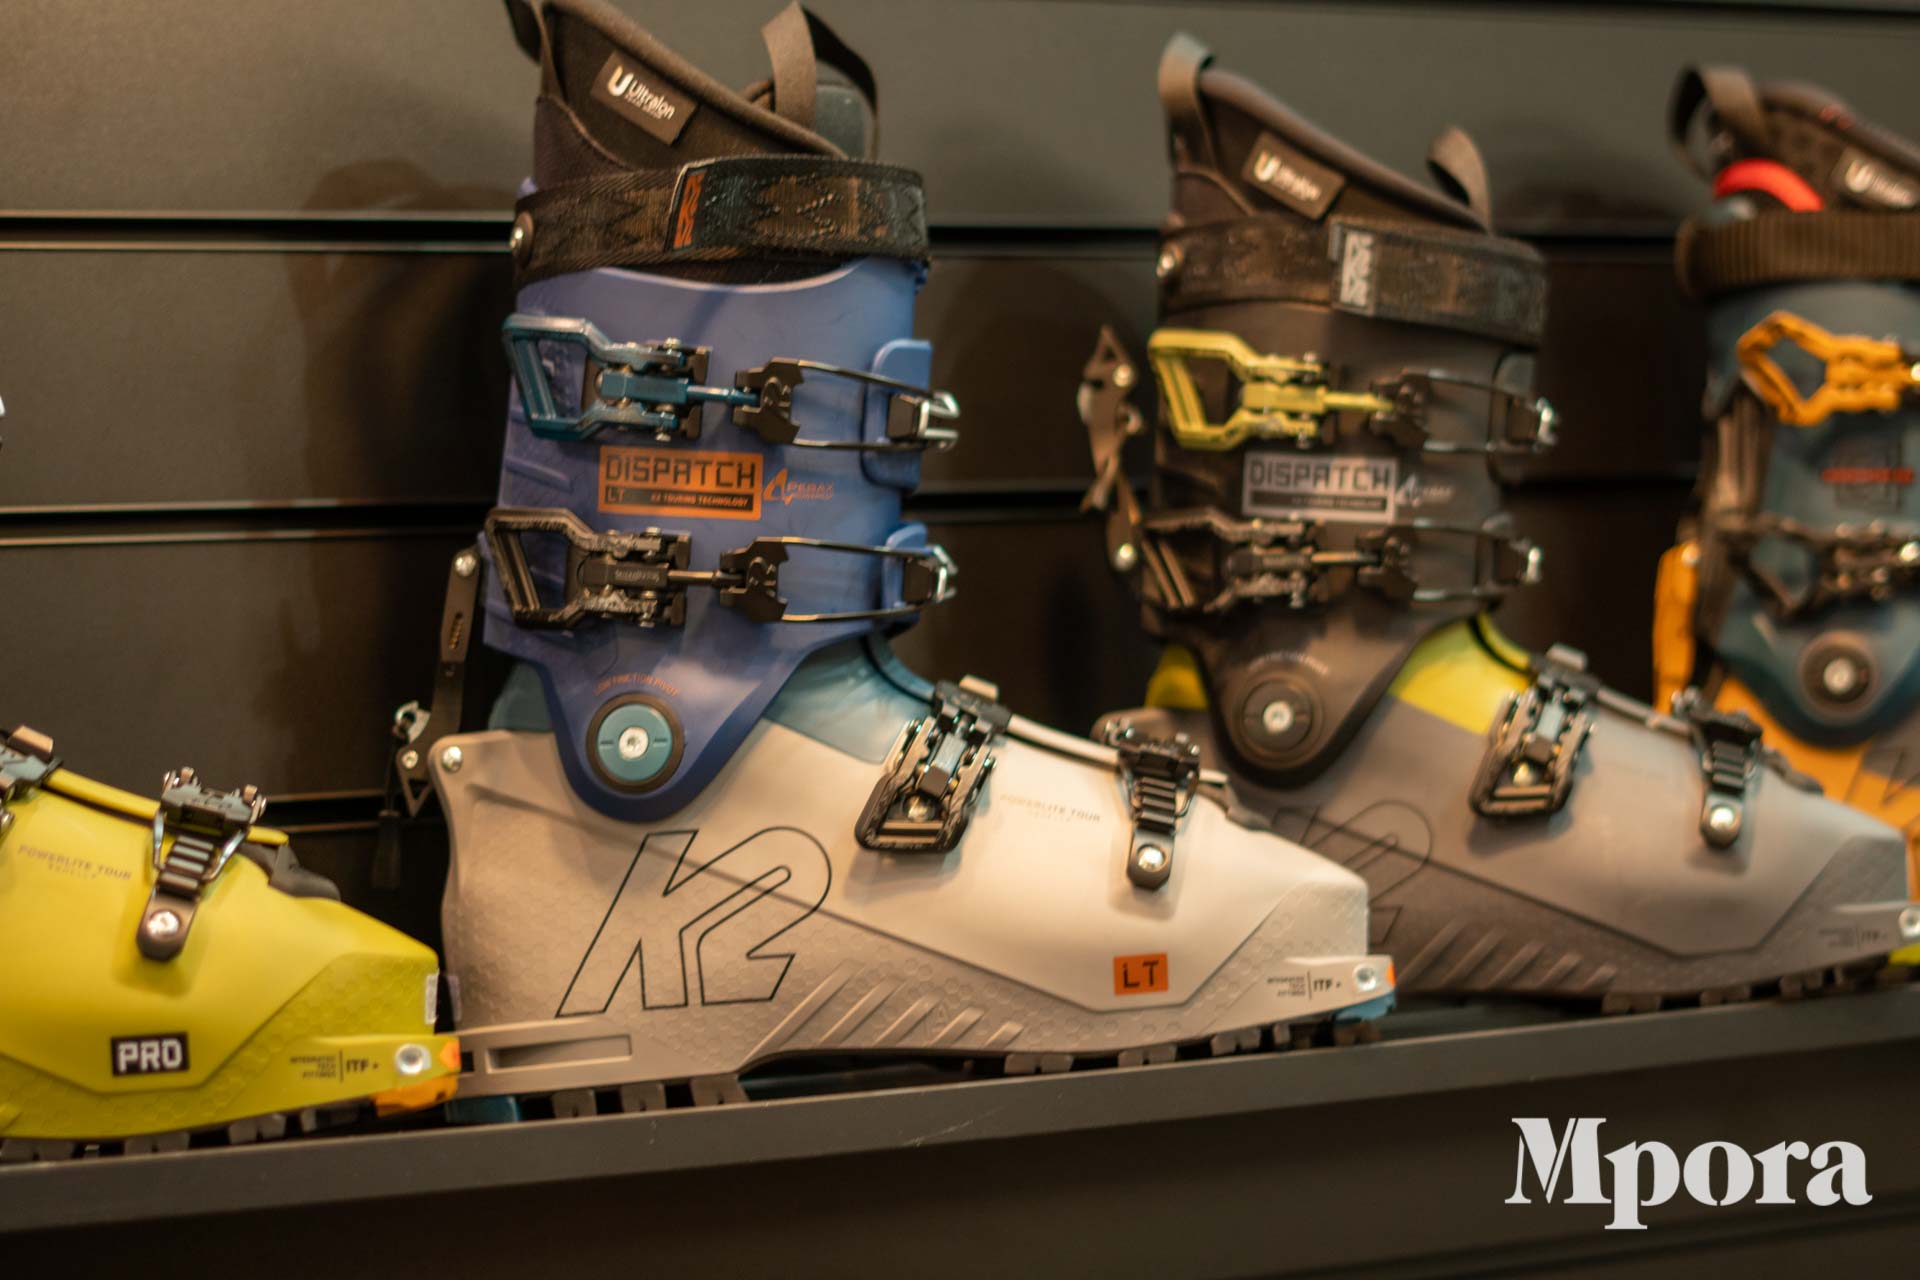 Ski Gear Product Preview For Winter 2022/2023